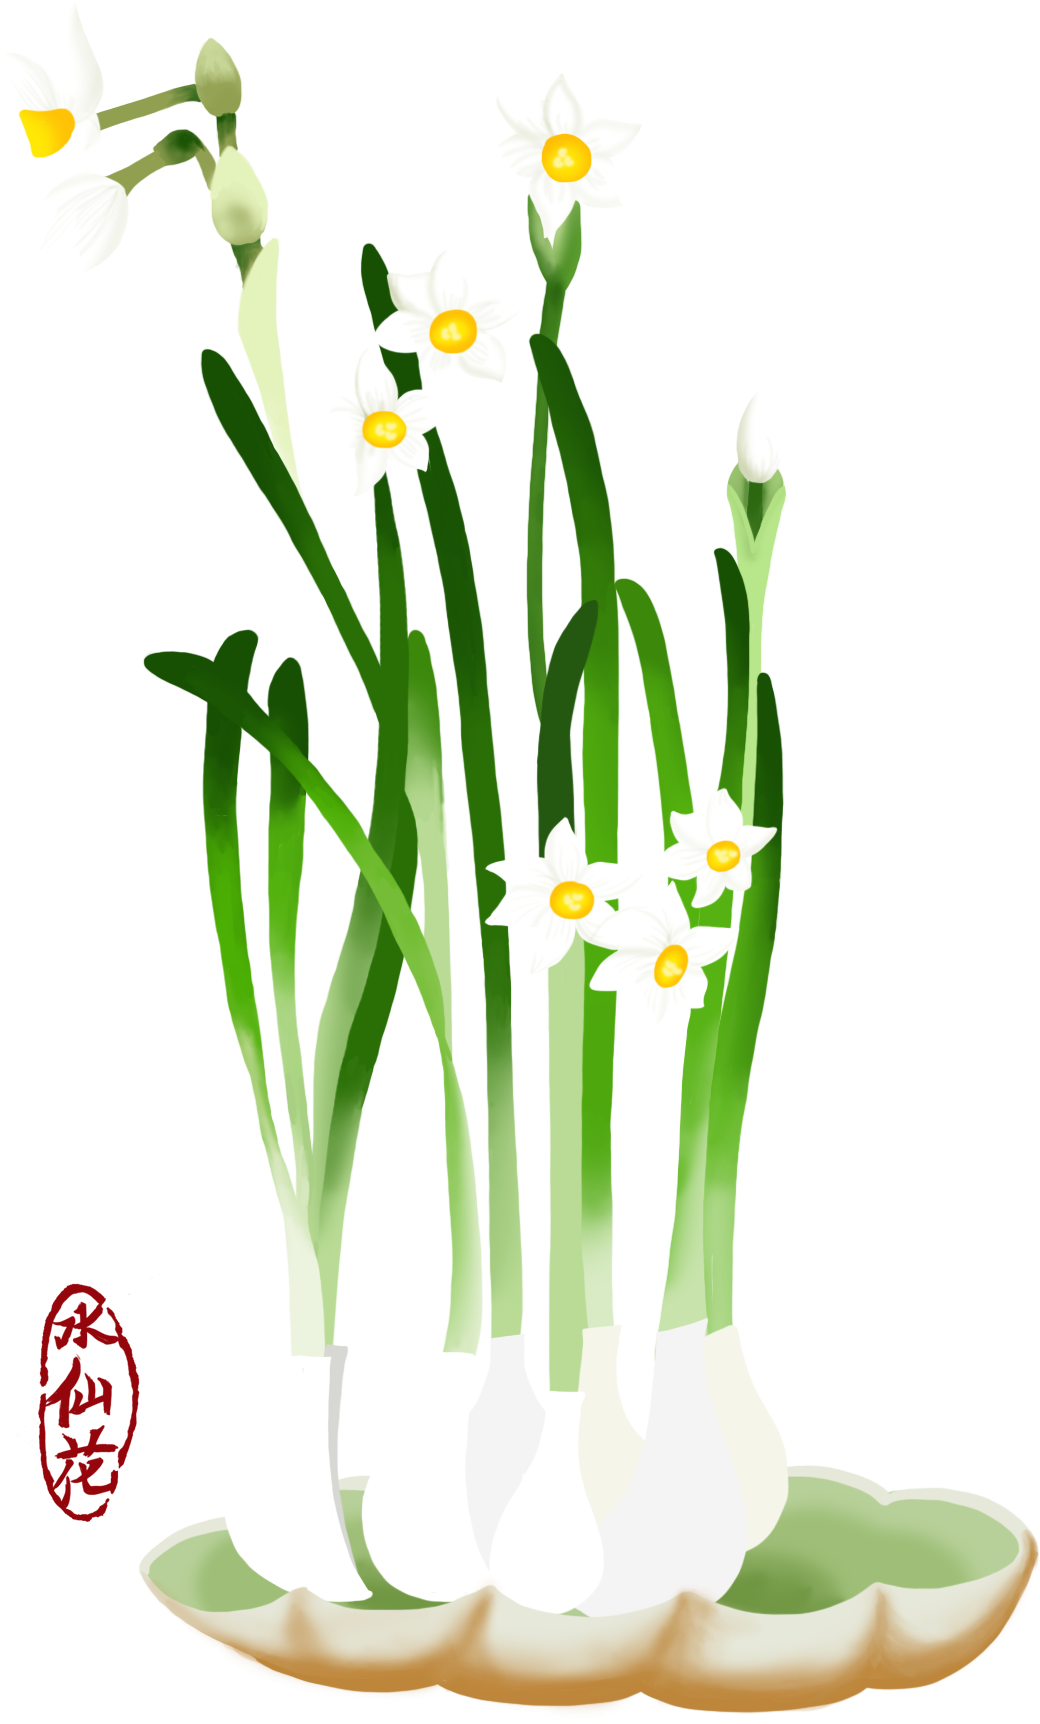 A Group Of White Flowers And Green Stems